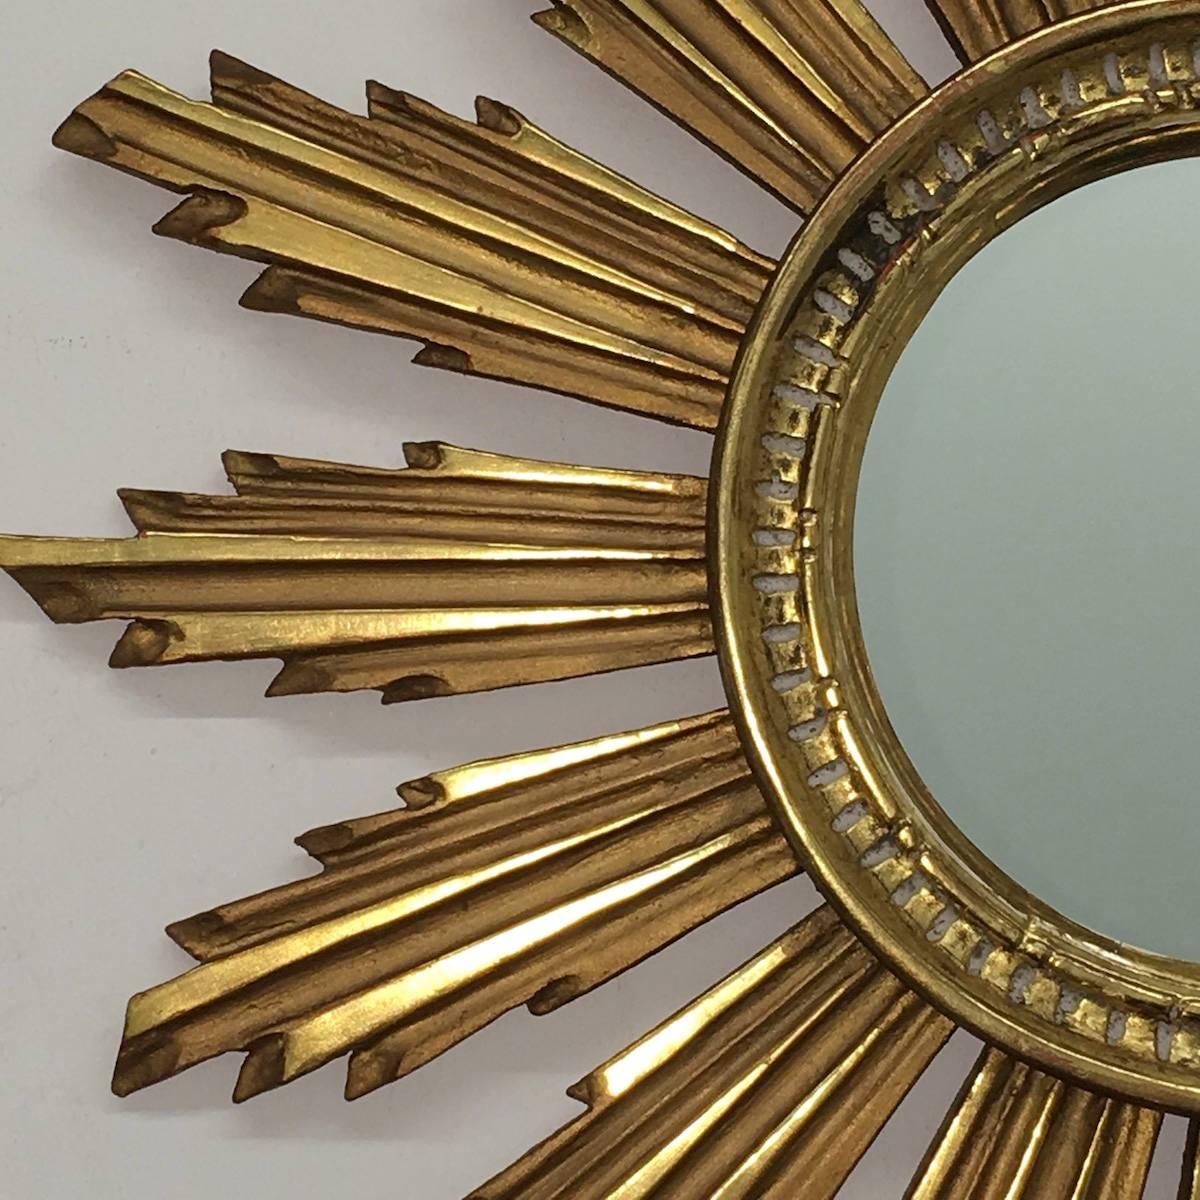 Gorgeous starburst mirror.
Made of gilded wood.
No chips, no cracks, no repairs.
It Measures approximate 22